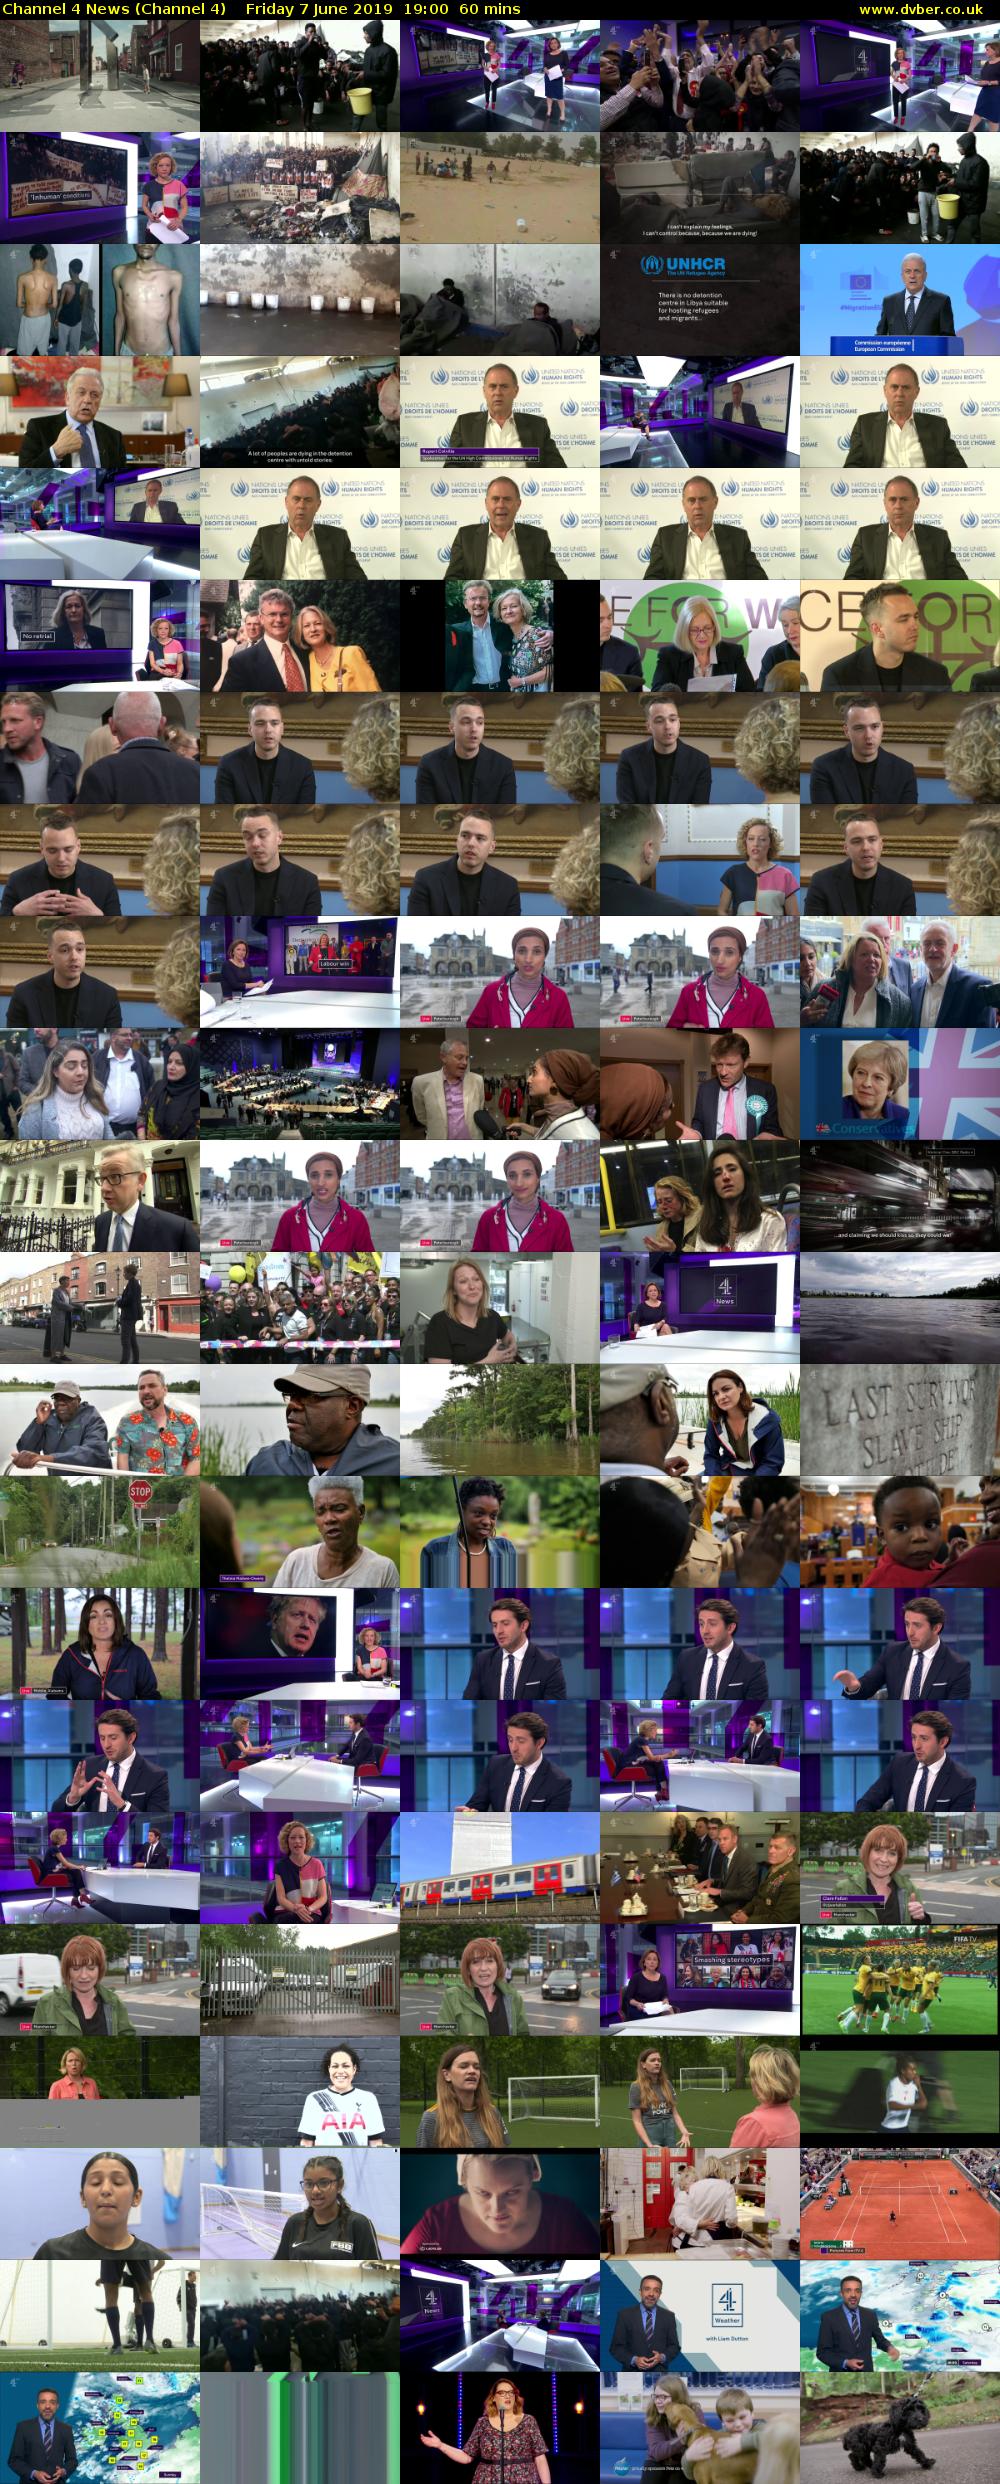 Channel 4 News (Channel 4) Friday 7 June 2019 19:00 - 20:00